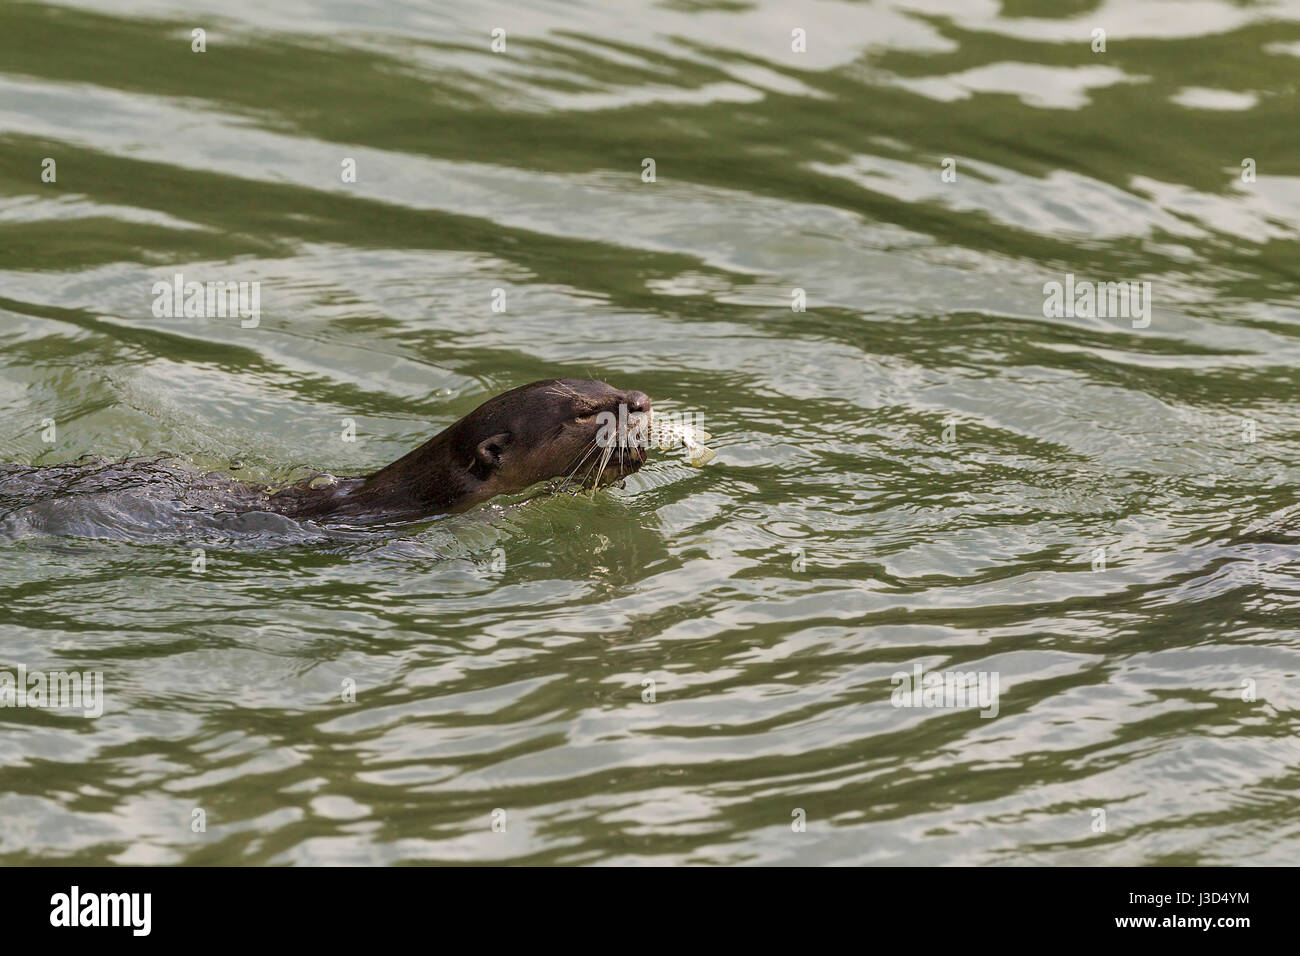 A Smooth-coated otter (Lutrogale perspicillata) parent swims across a mangrove river carrying a freshly caught fish to its young, Singapore Stock Photo